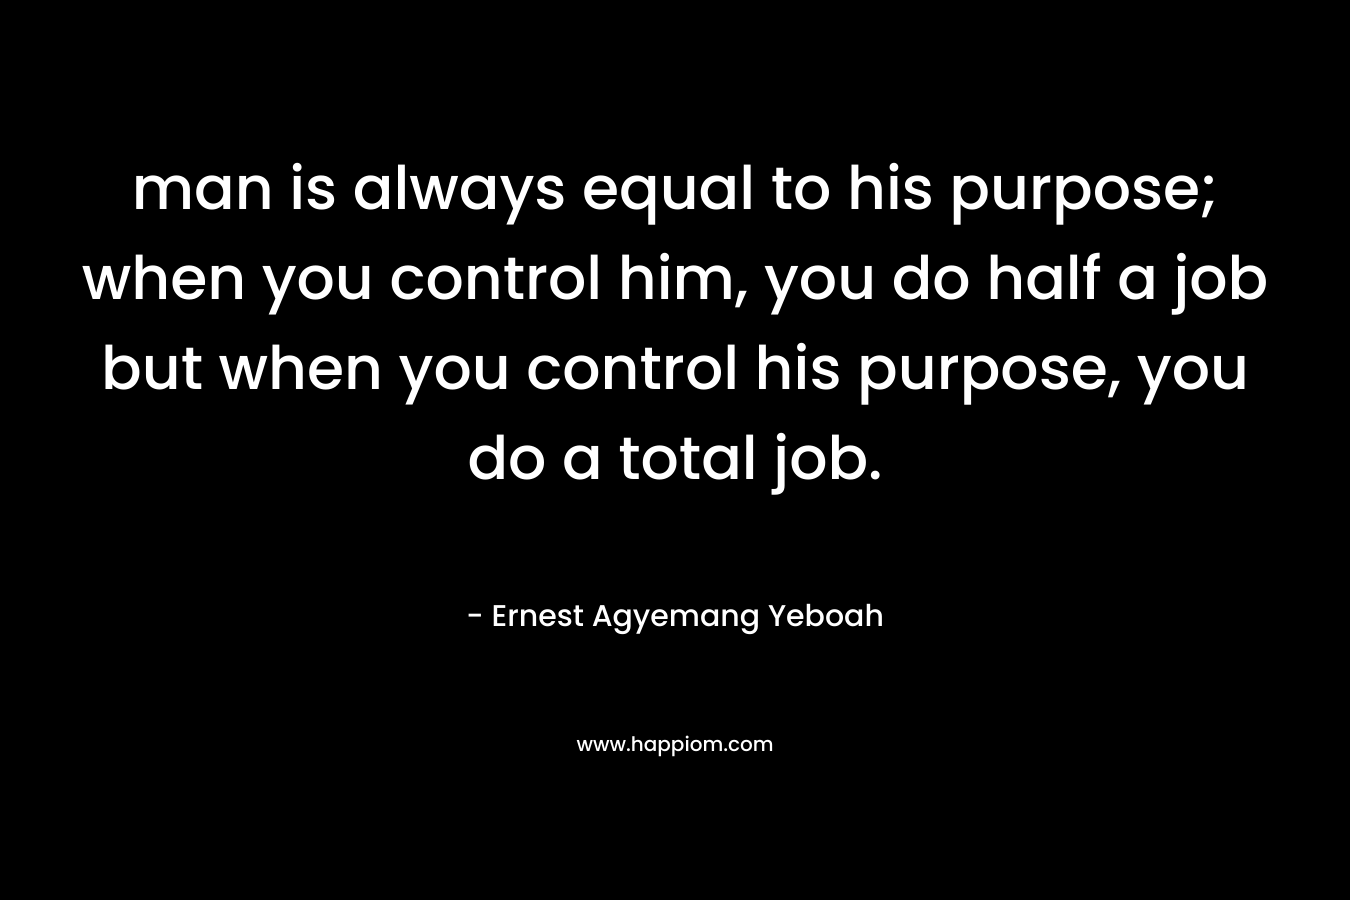 man is always equal to his purpose; when you control him, you do half a job but when you control his purpose, you do a total job.